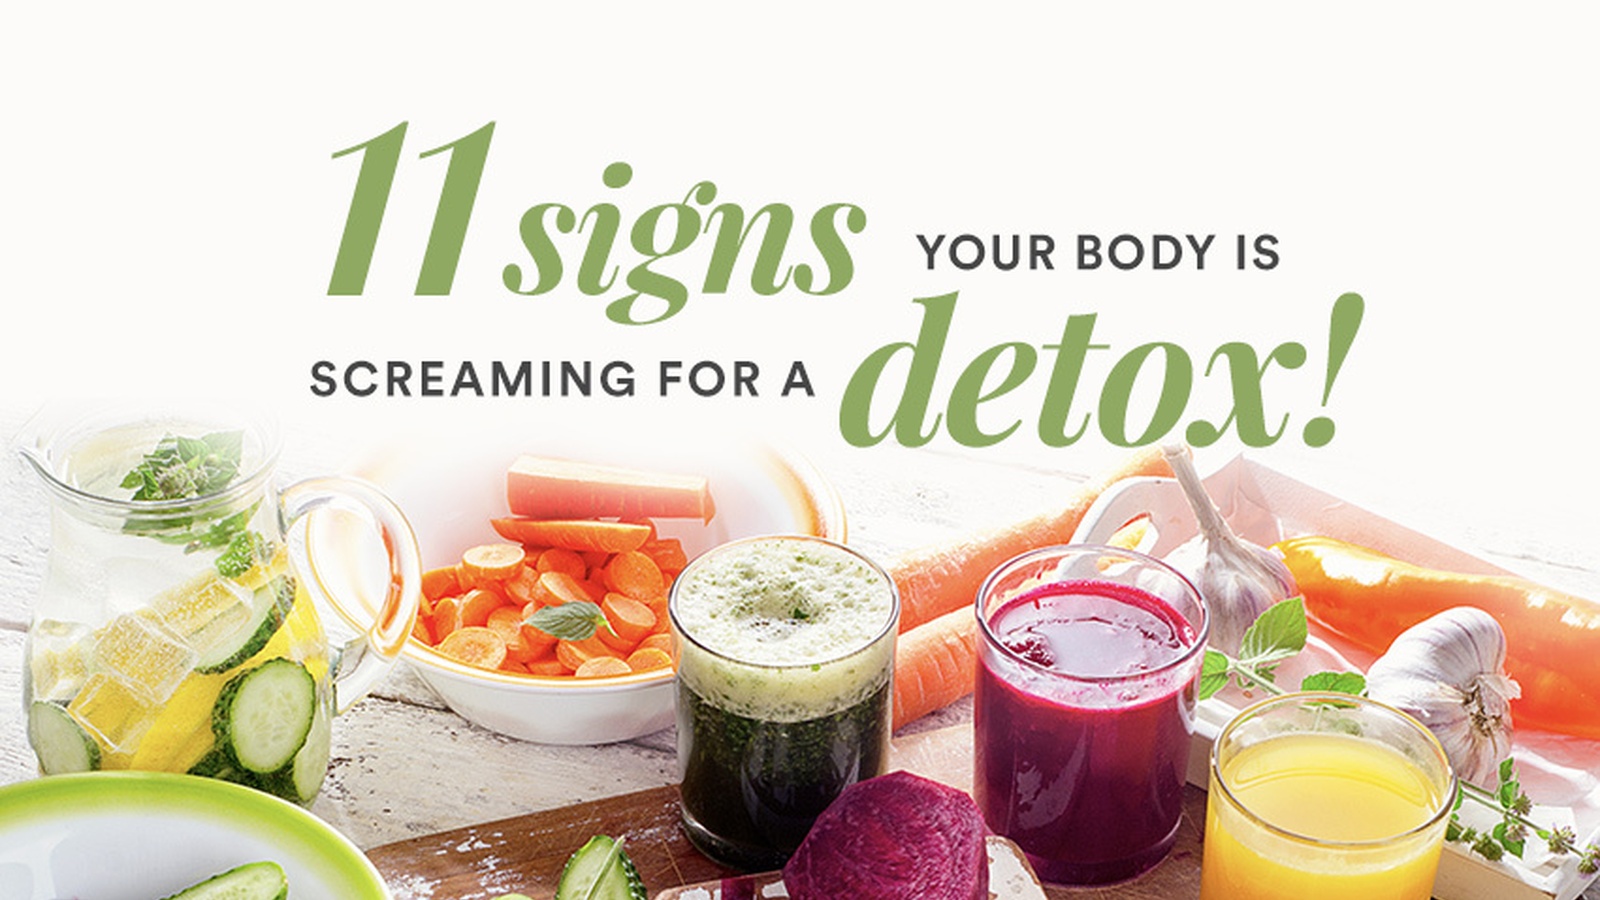 11 Signs Your Body Is Screaming for a Detox